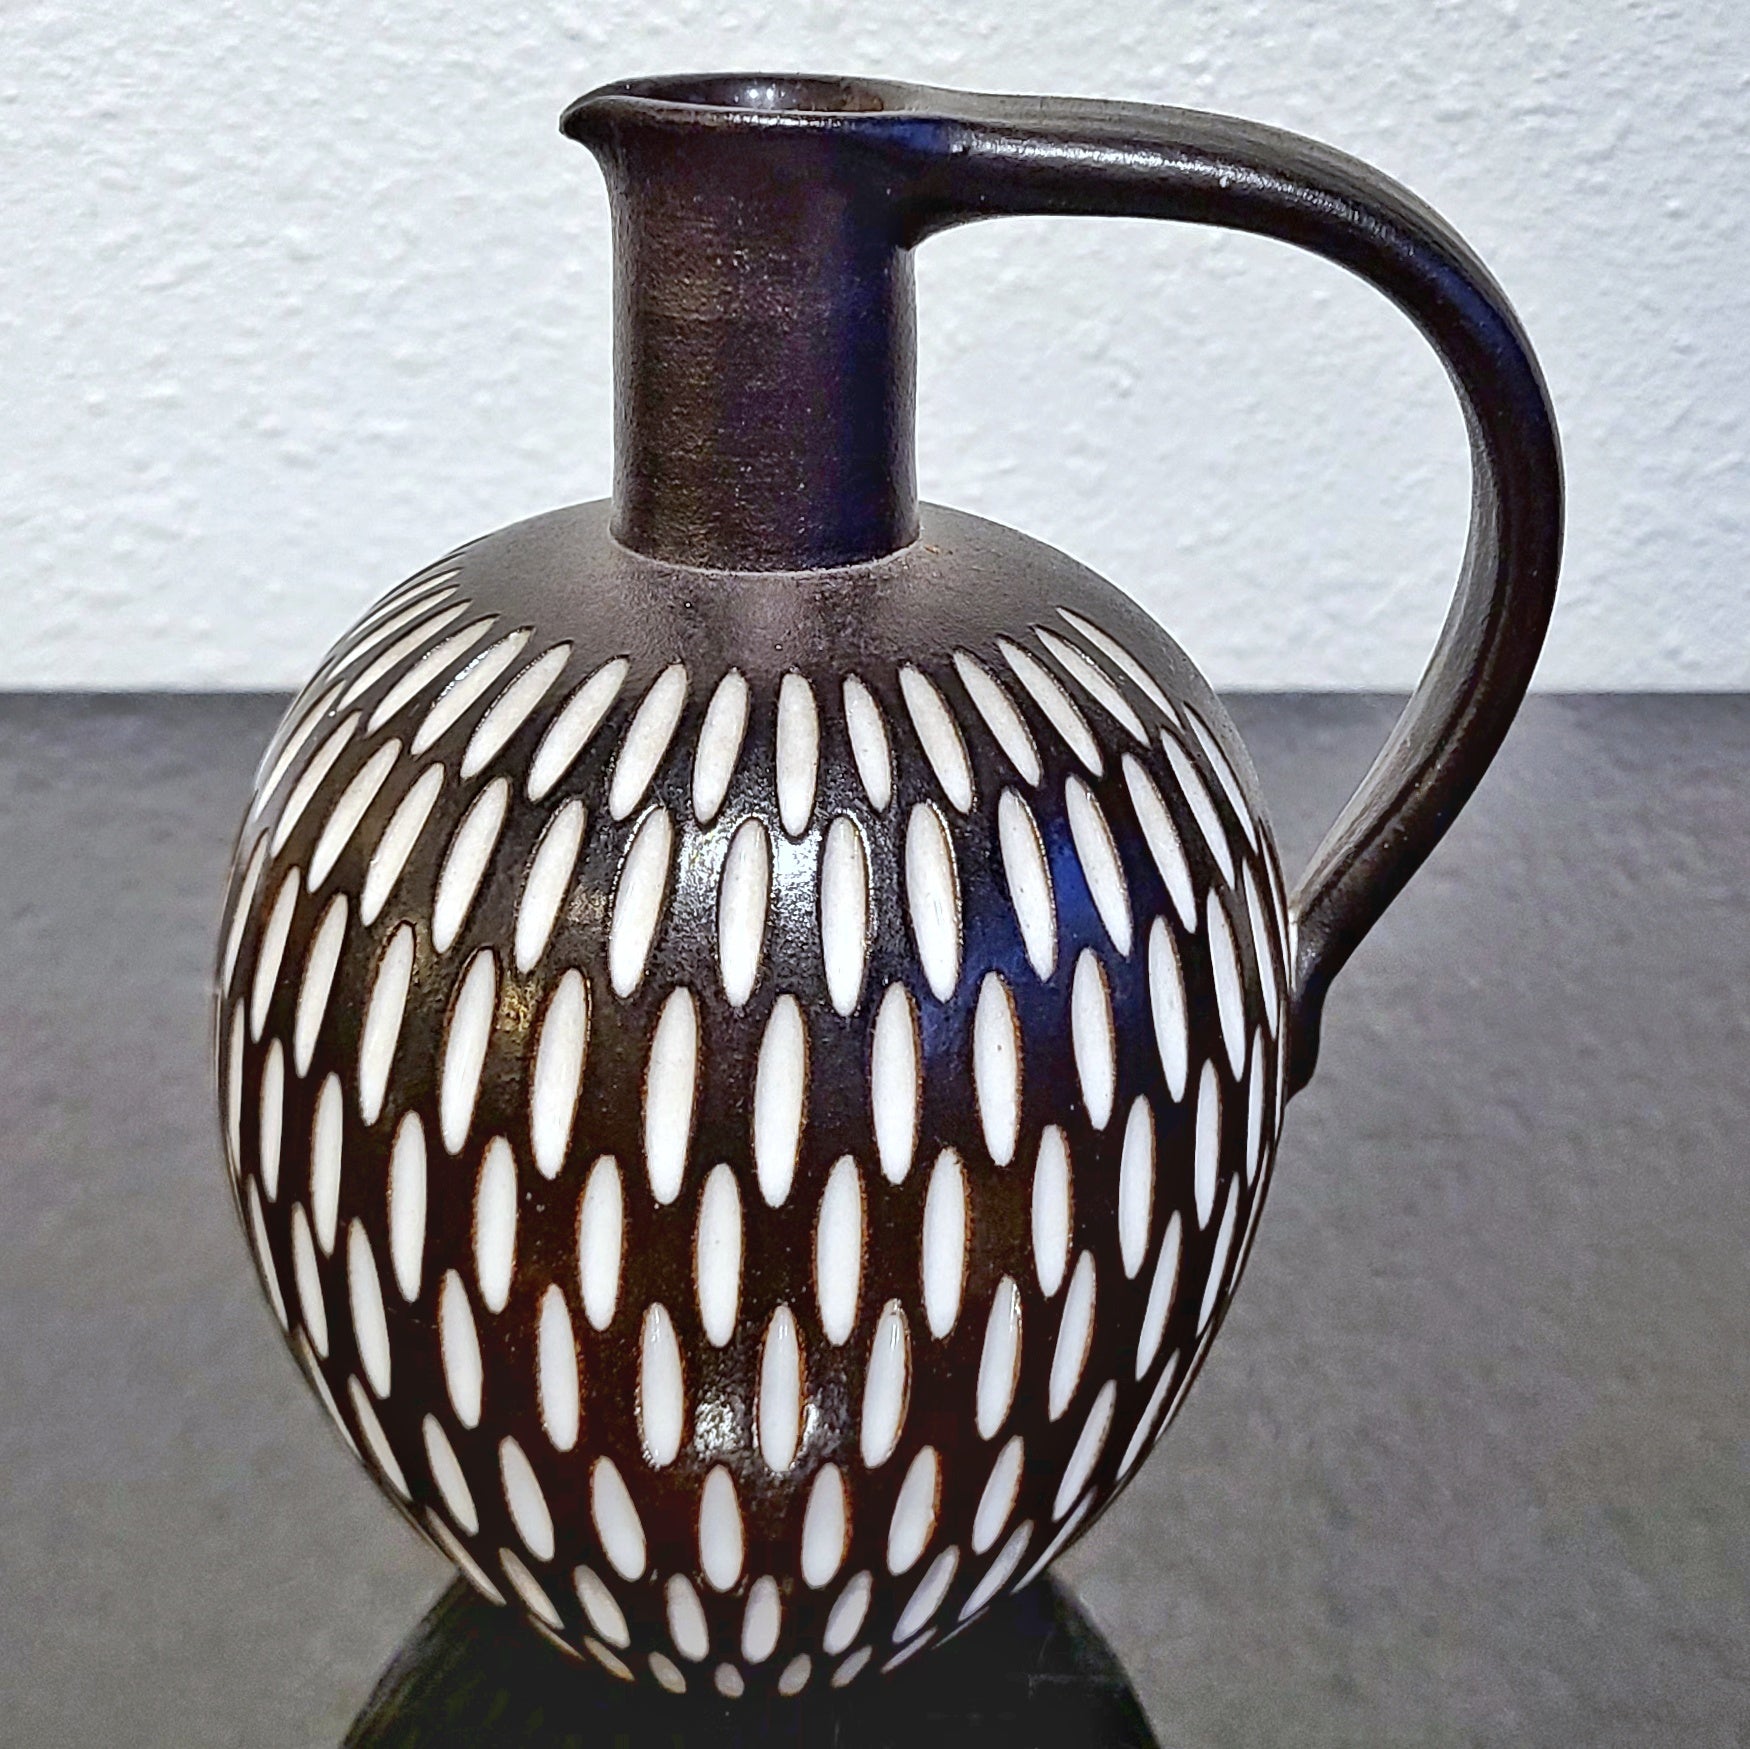 STUDIO POTTERY JUG VASE BY WILHELM AND ELLY KUCH (SIGNED)